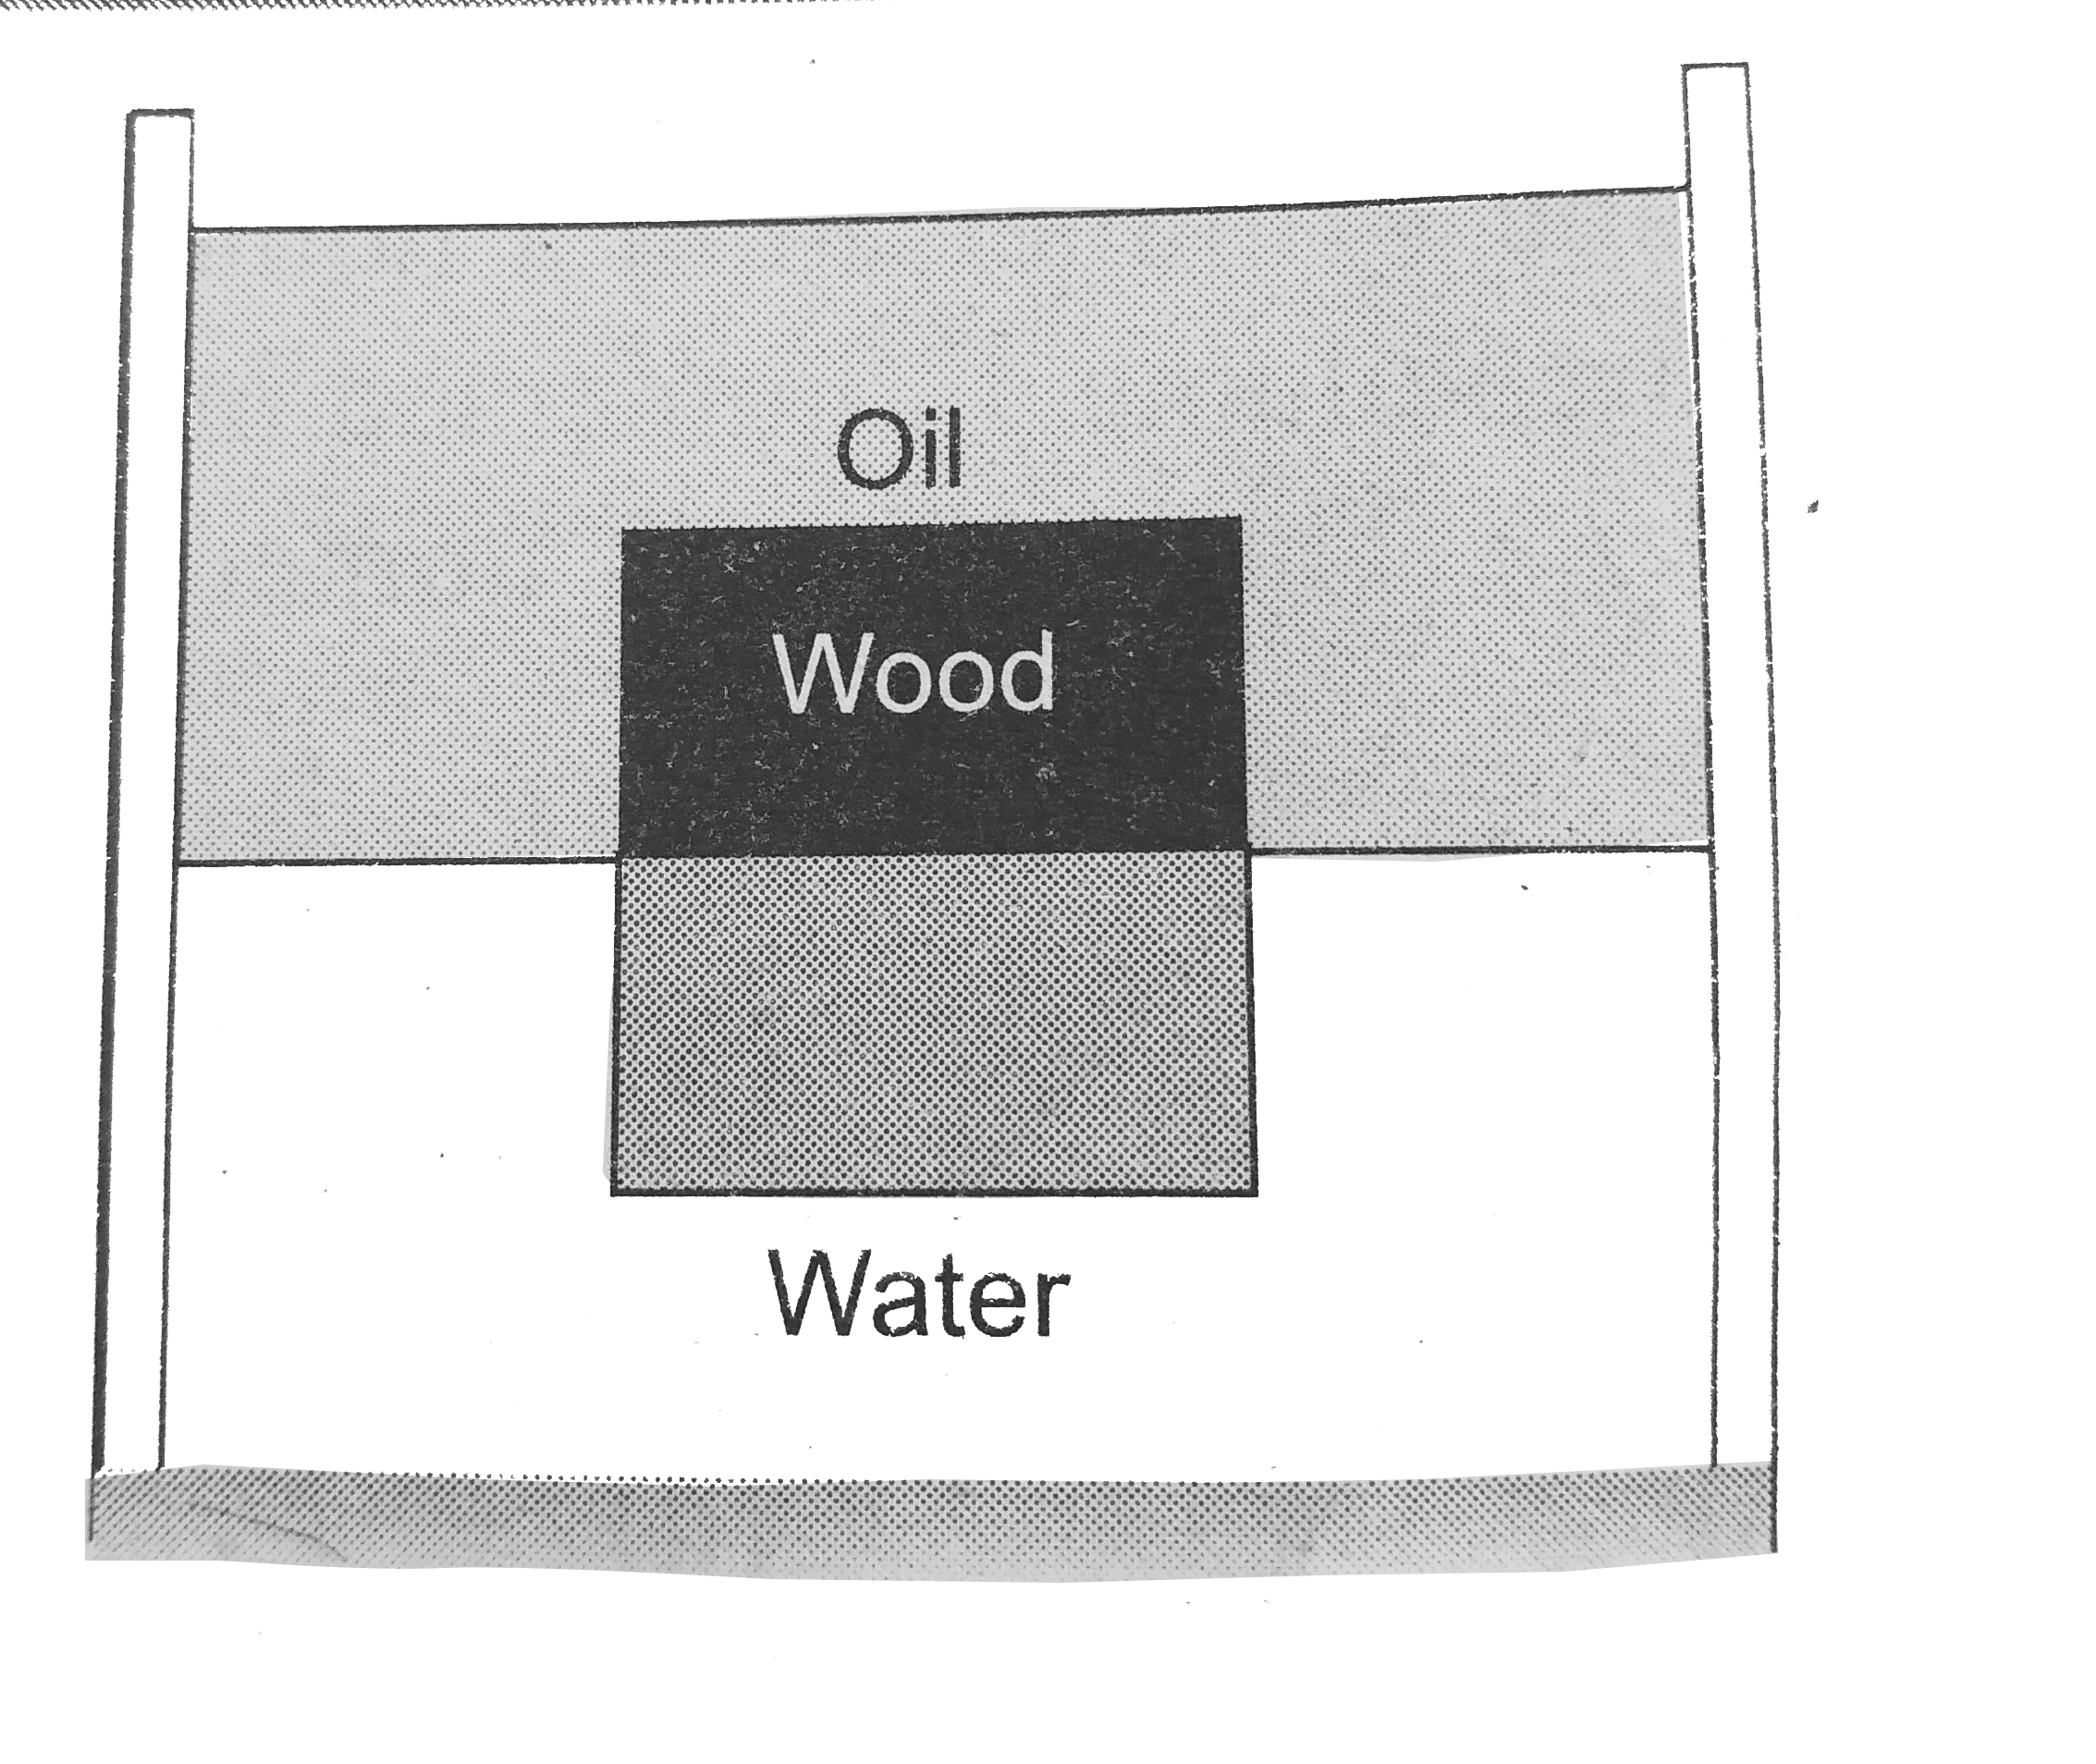 A cubical block of wood 10cm on a side floats at the interface between oil and water, as in fig. with its lower face 2 cm below the interface. The intensity of the oli is 0.6 g cm^(-3). The mass of the block is 1 kg